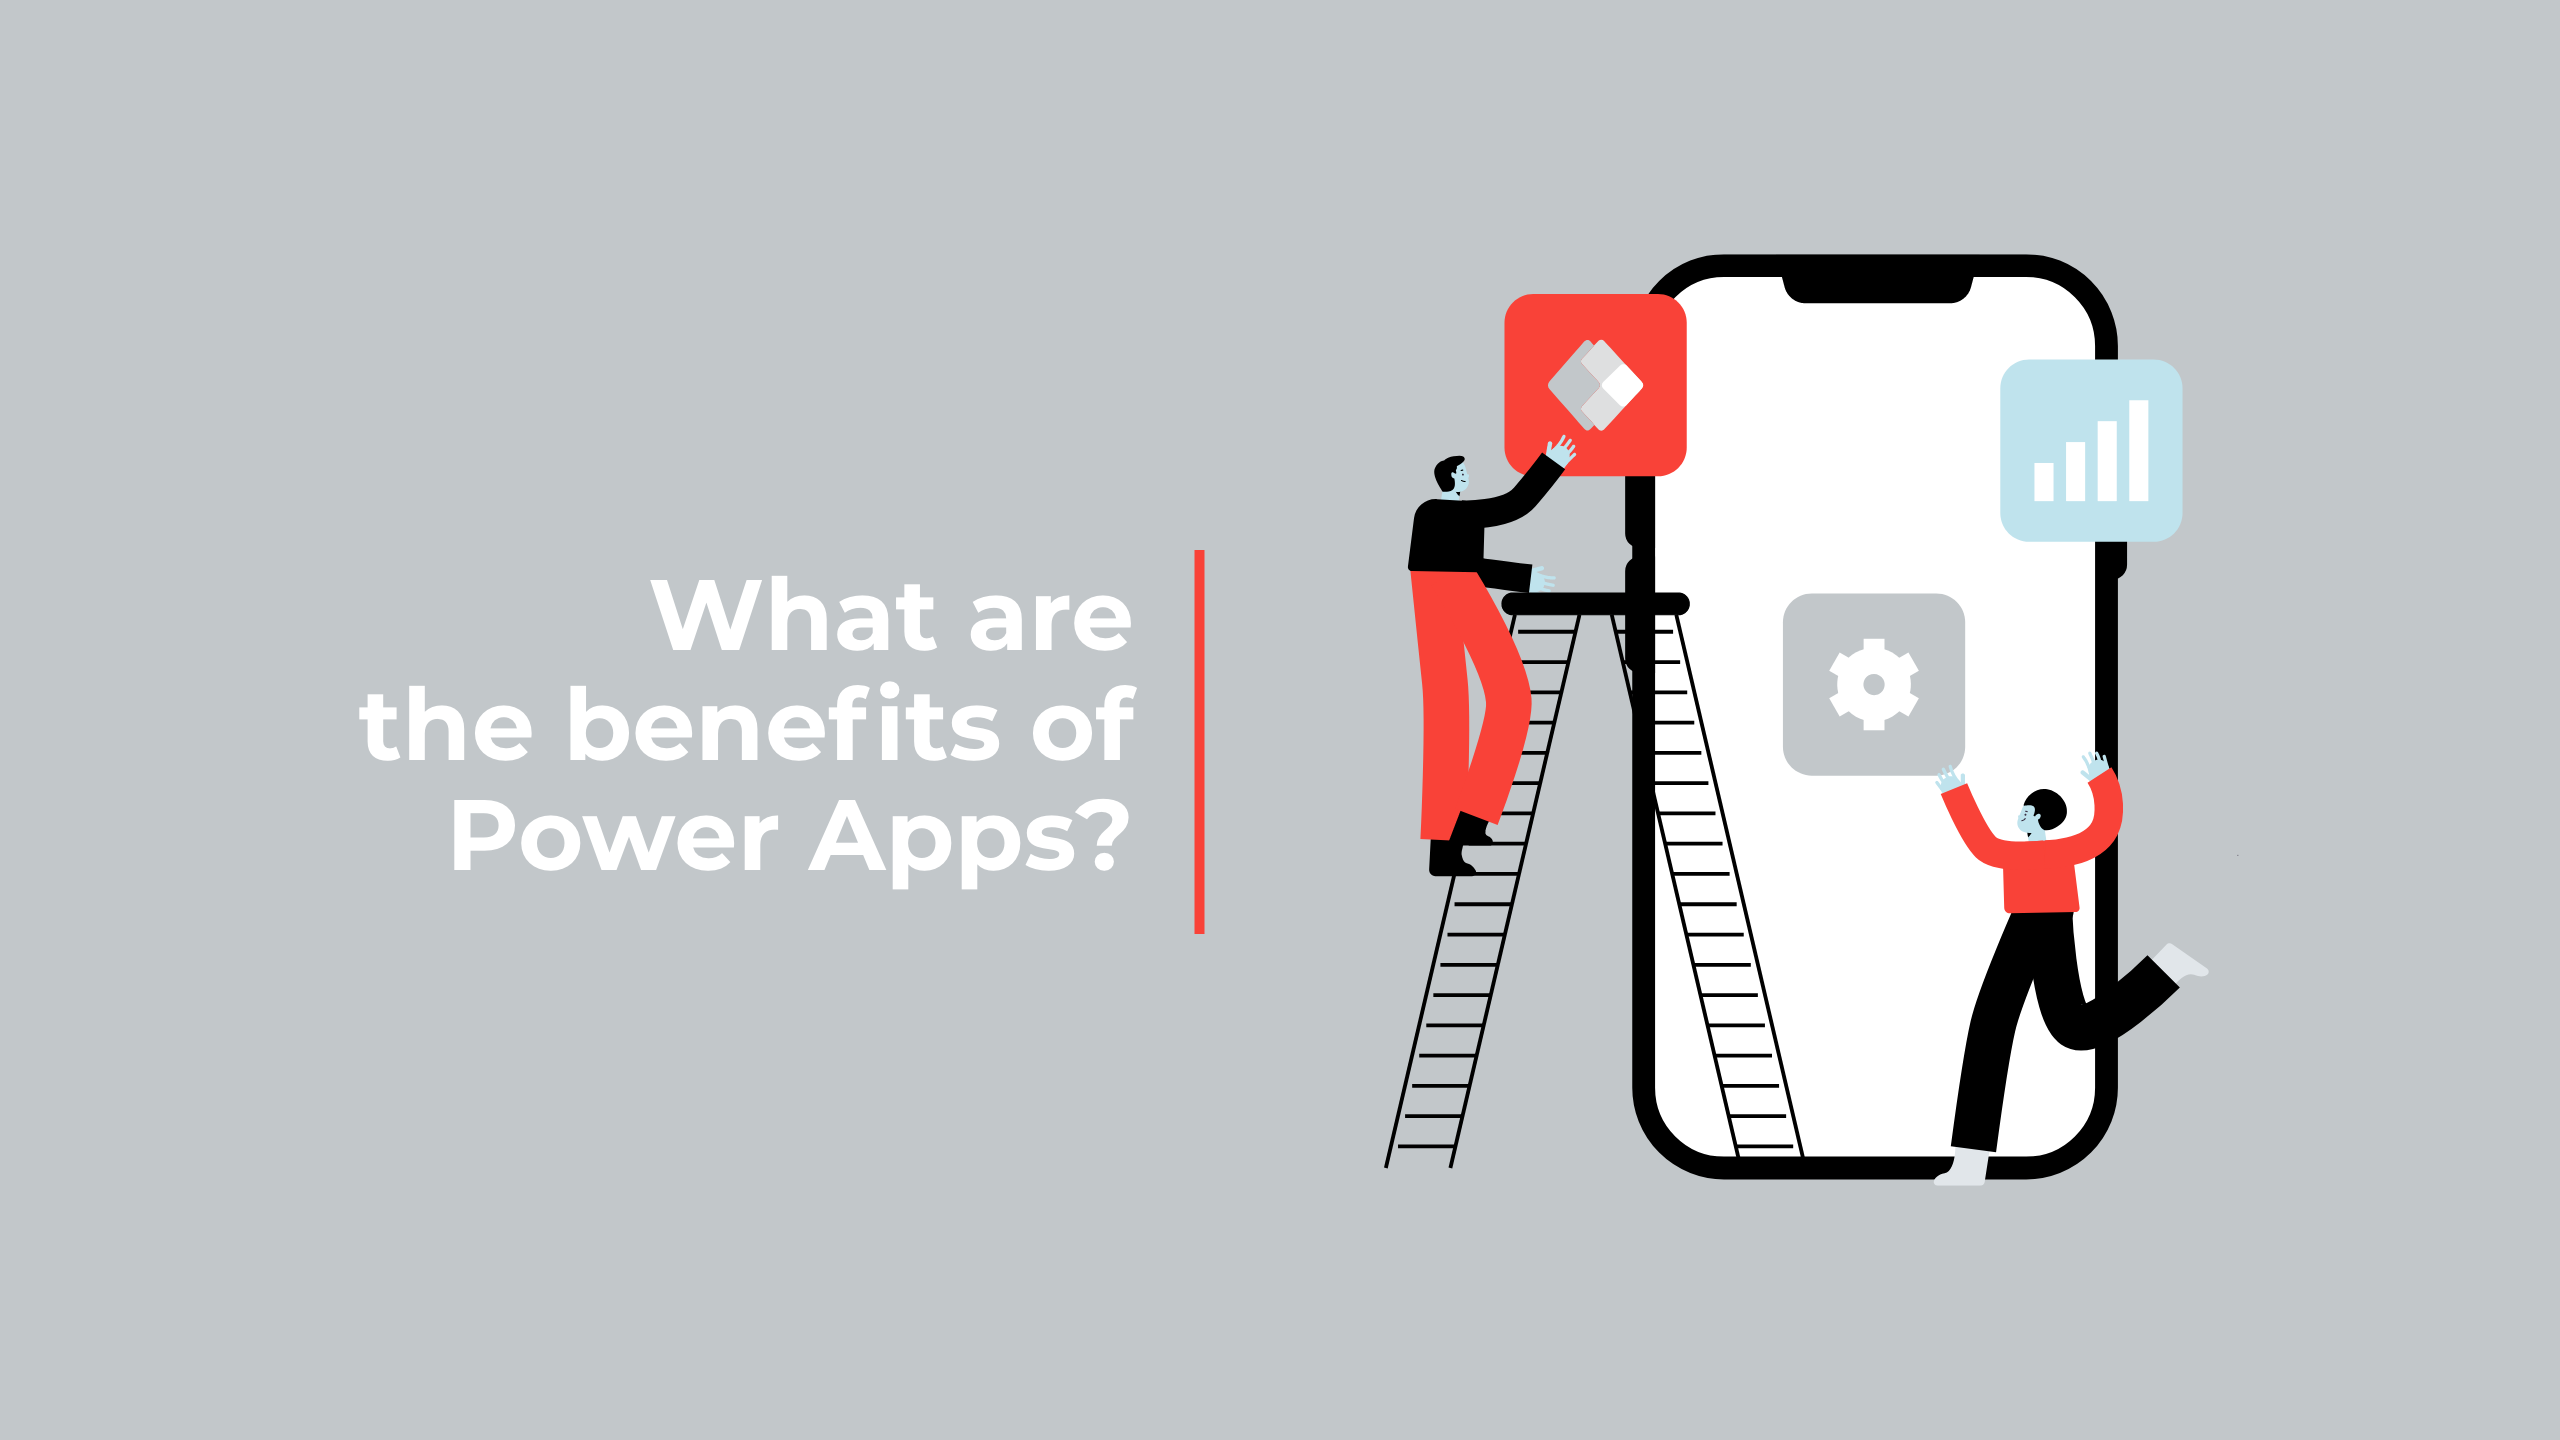 The benefits of Power Apps?